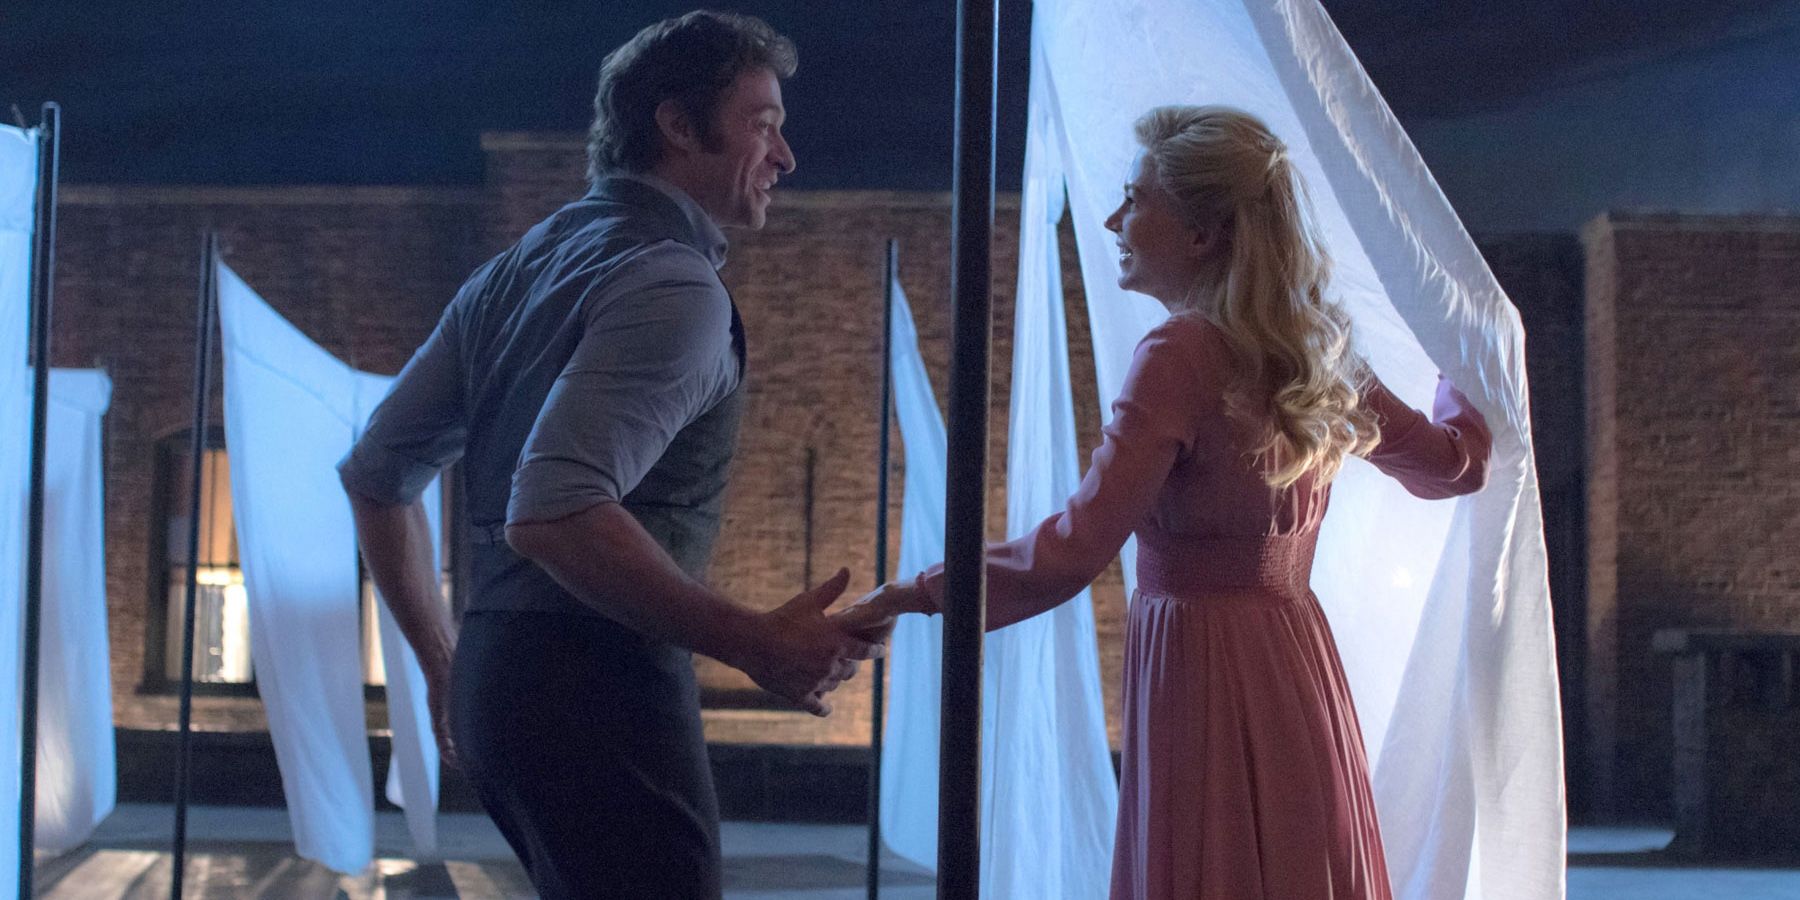 Hugh Jackman and Michelle Williams on a rooftop in The Greatest Showman